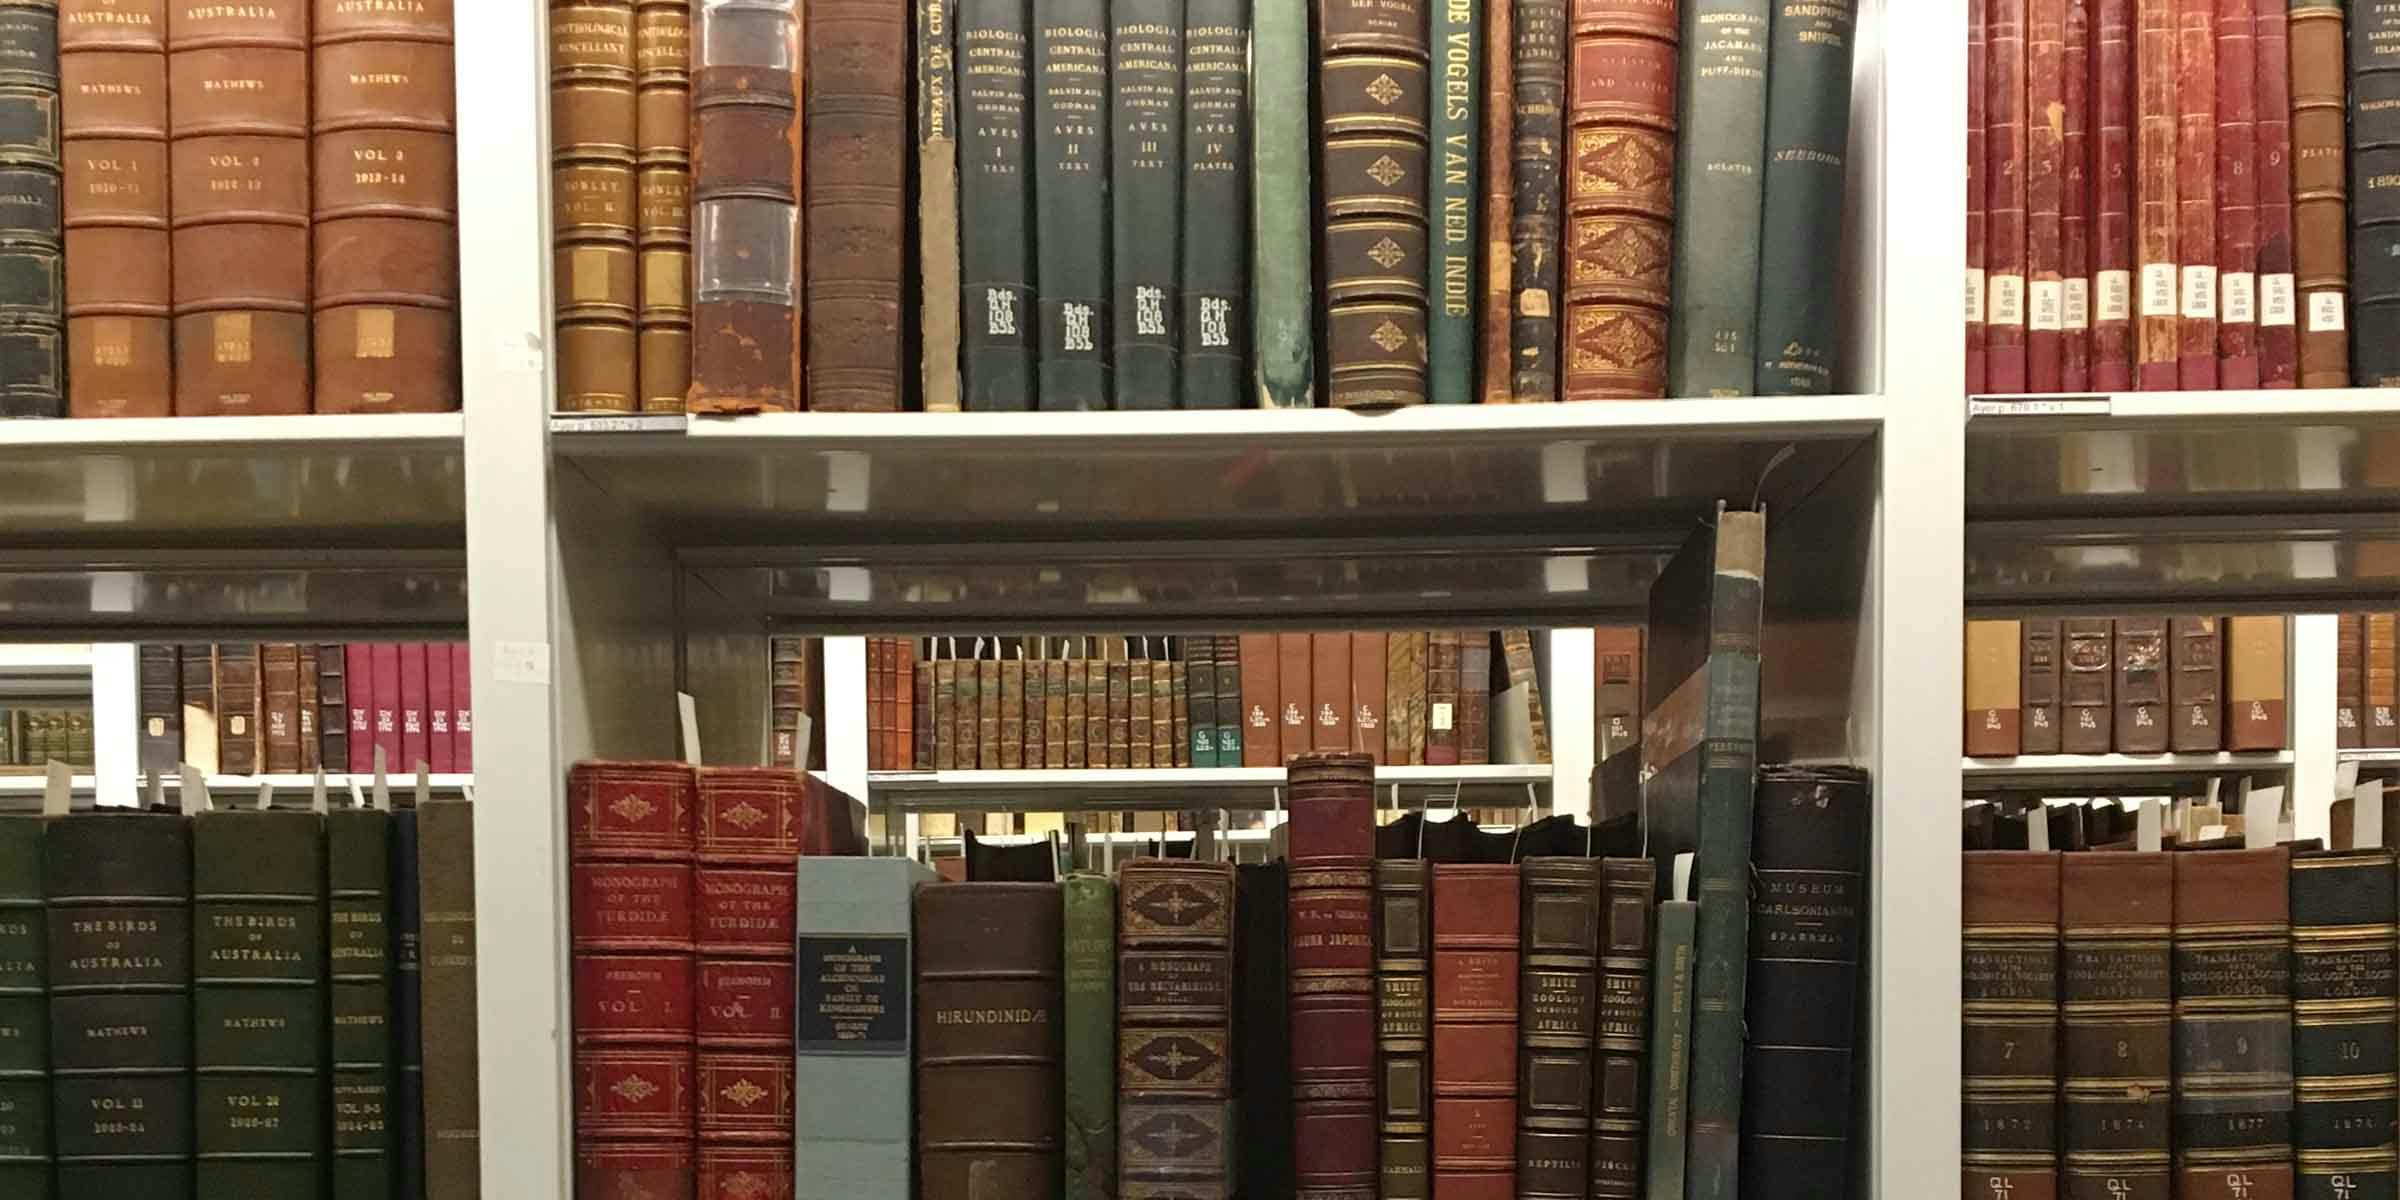 Shelves of large, ornate books in different colors (green, brown, red, blue), many with gold designs emblazoned on their spines